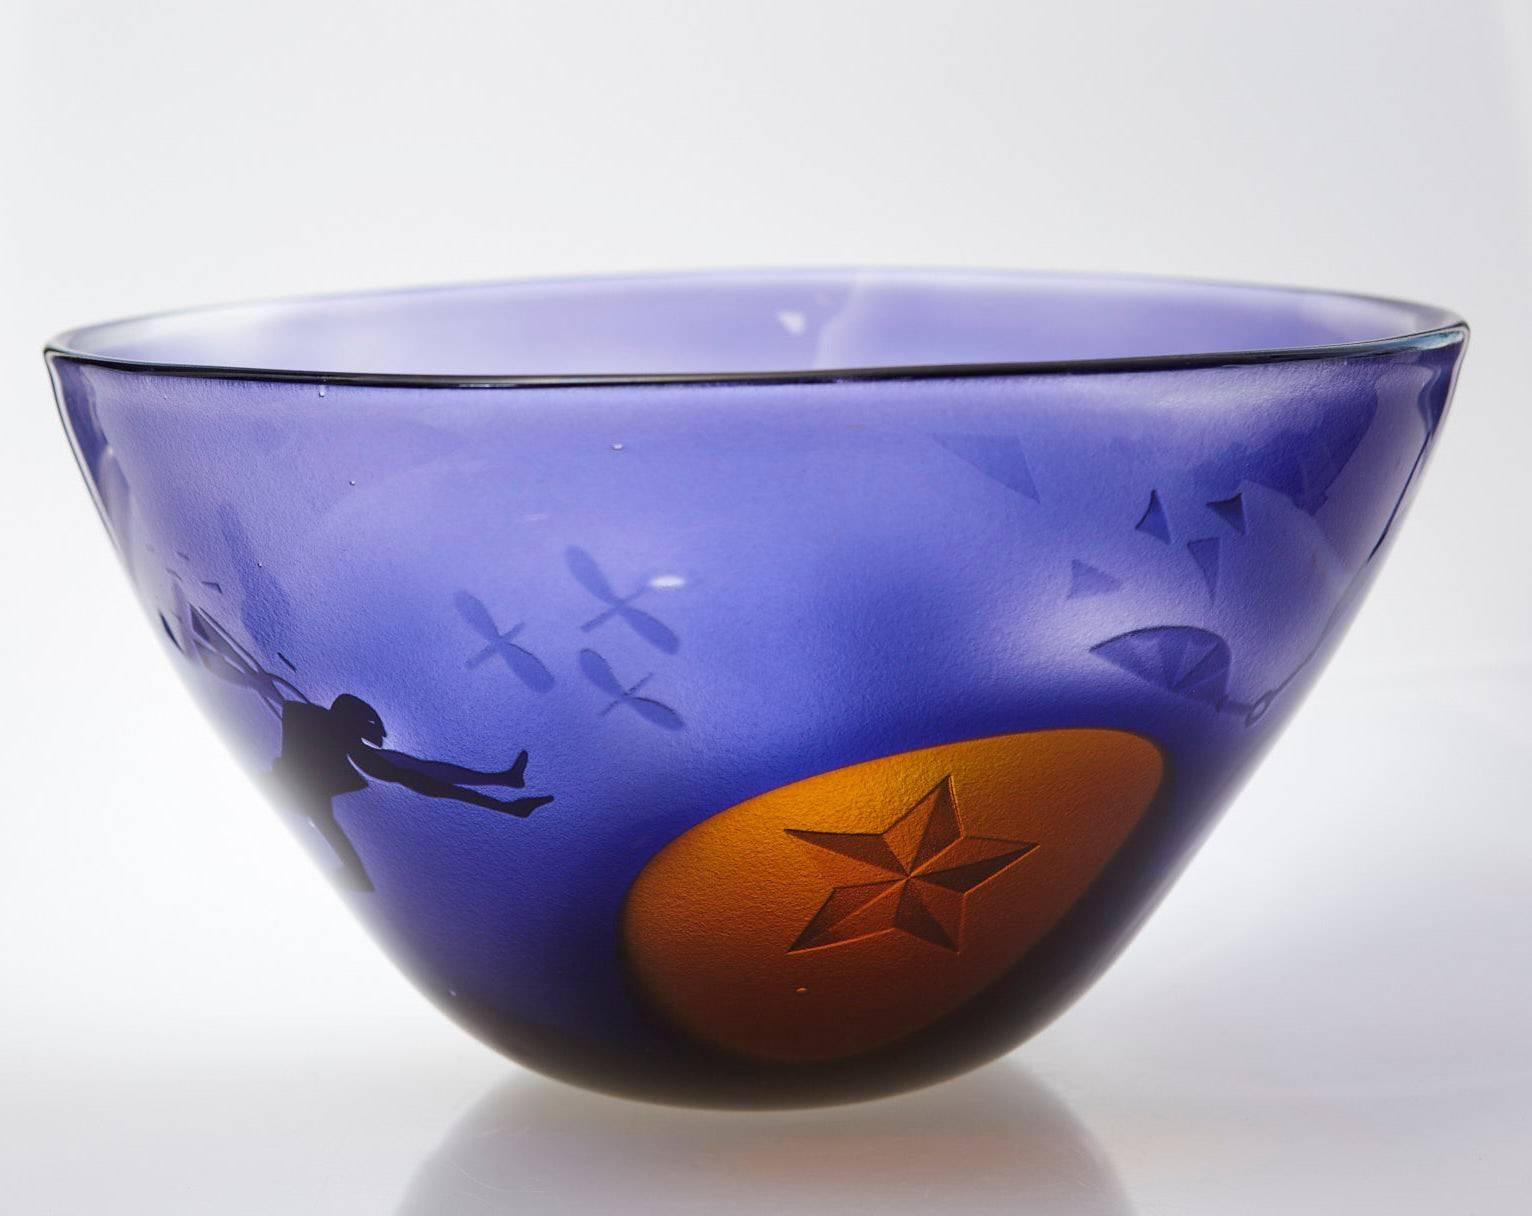 Outstanding blue art glass vase with sand blasted surrealistic, dream like sequences eternalized in glass.
This bowl is a unique piece of art from the the Kosta Unik Collection # 7008 by Swedish Glass Artist Bertil Vallien, (Swedish 1938).
The